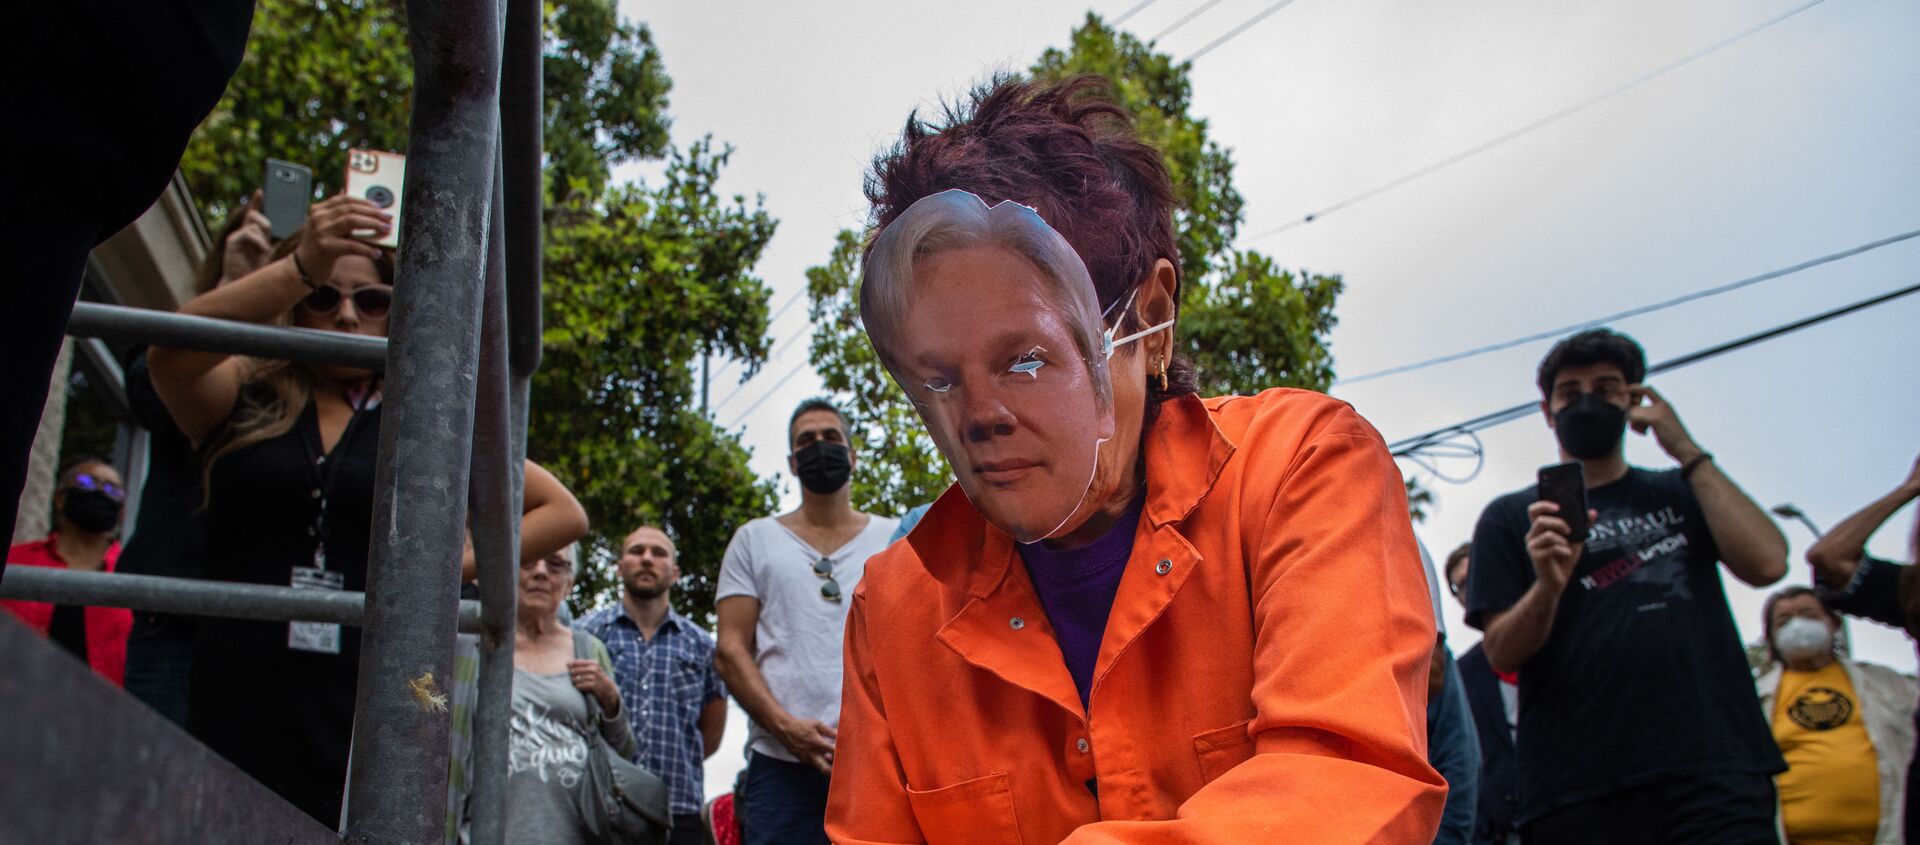 A woman wearing an orange jumpsuit and Julian Assange mask, lights a candle during a Free Julian Assange rally outside the Oakwood Community Center in Venice, Calif. on June 27, 2021, as part of a national tour to raise awareness of Assange as a threat to press freedom.  - Sputnik International, 1920, 08.07.2021